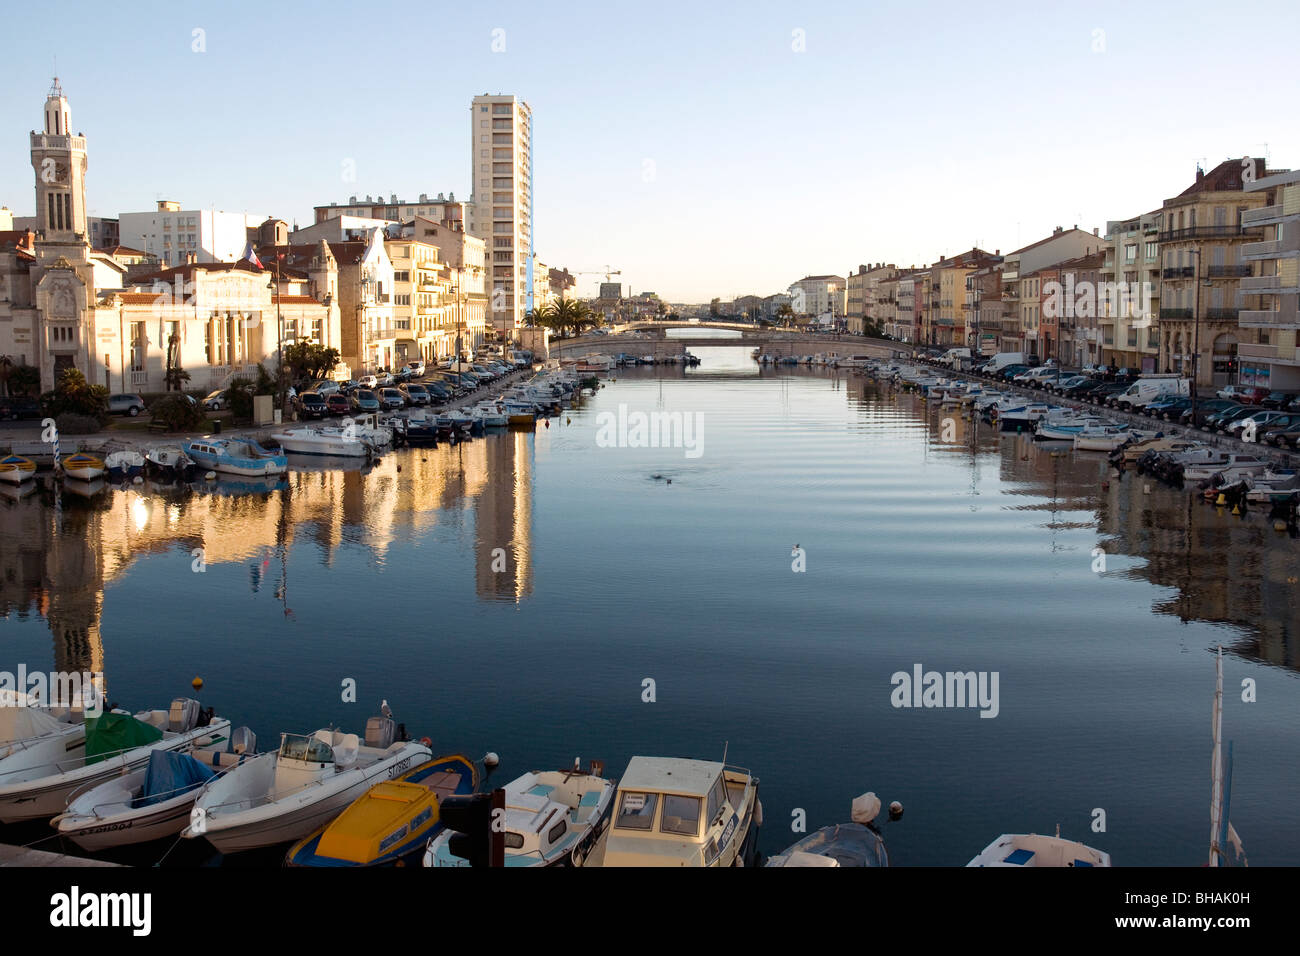 The boat-lined canals of Sète, France's largest  Mediterranean fishing port, are among its most appealing features Stock Photo